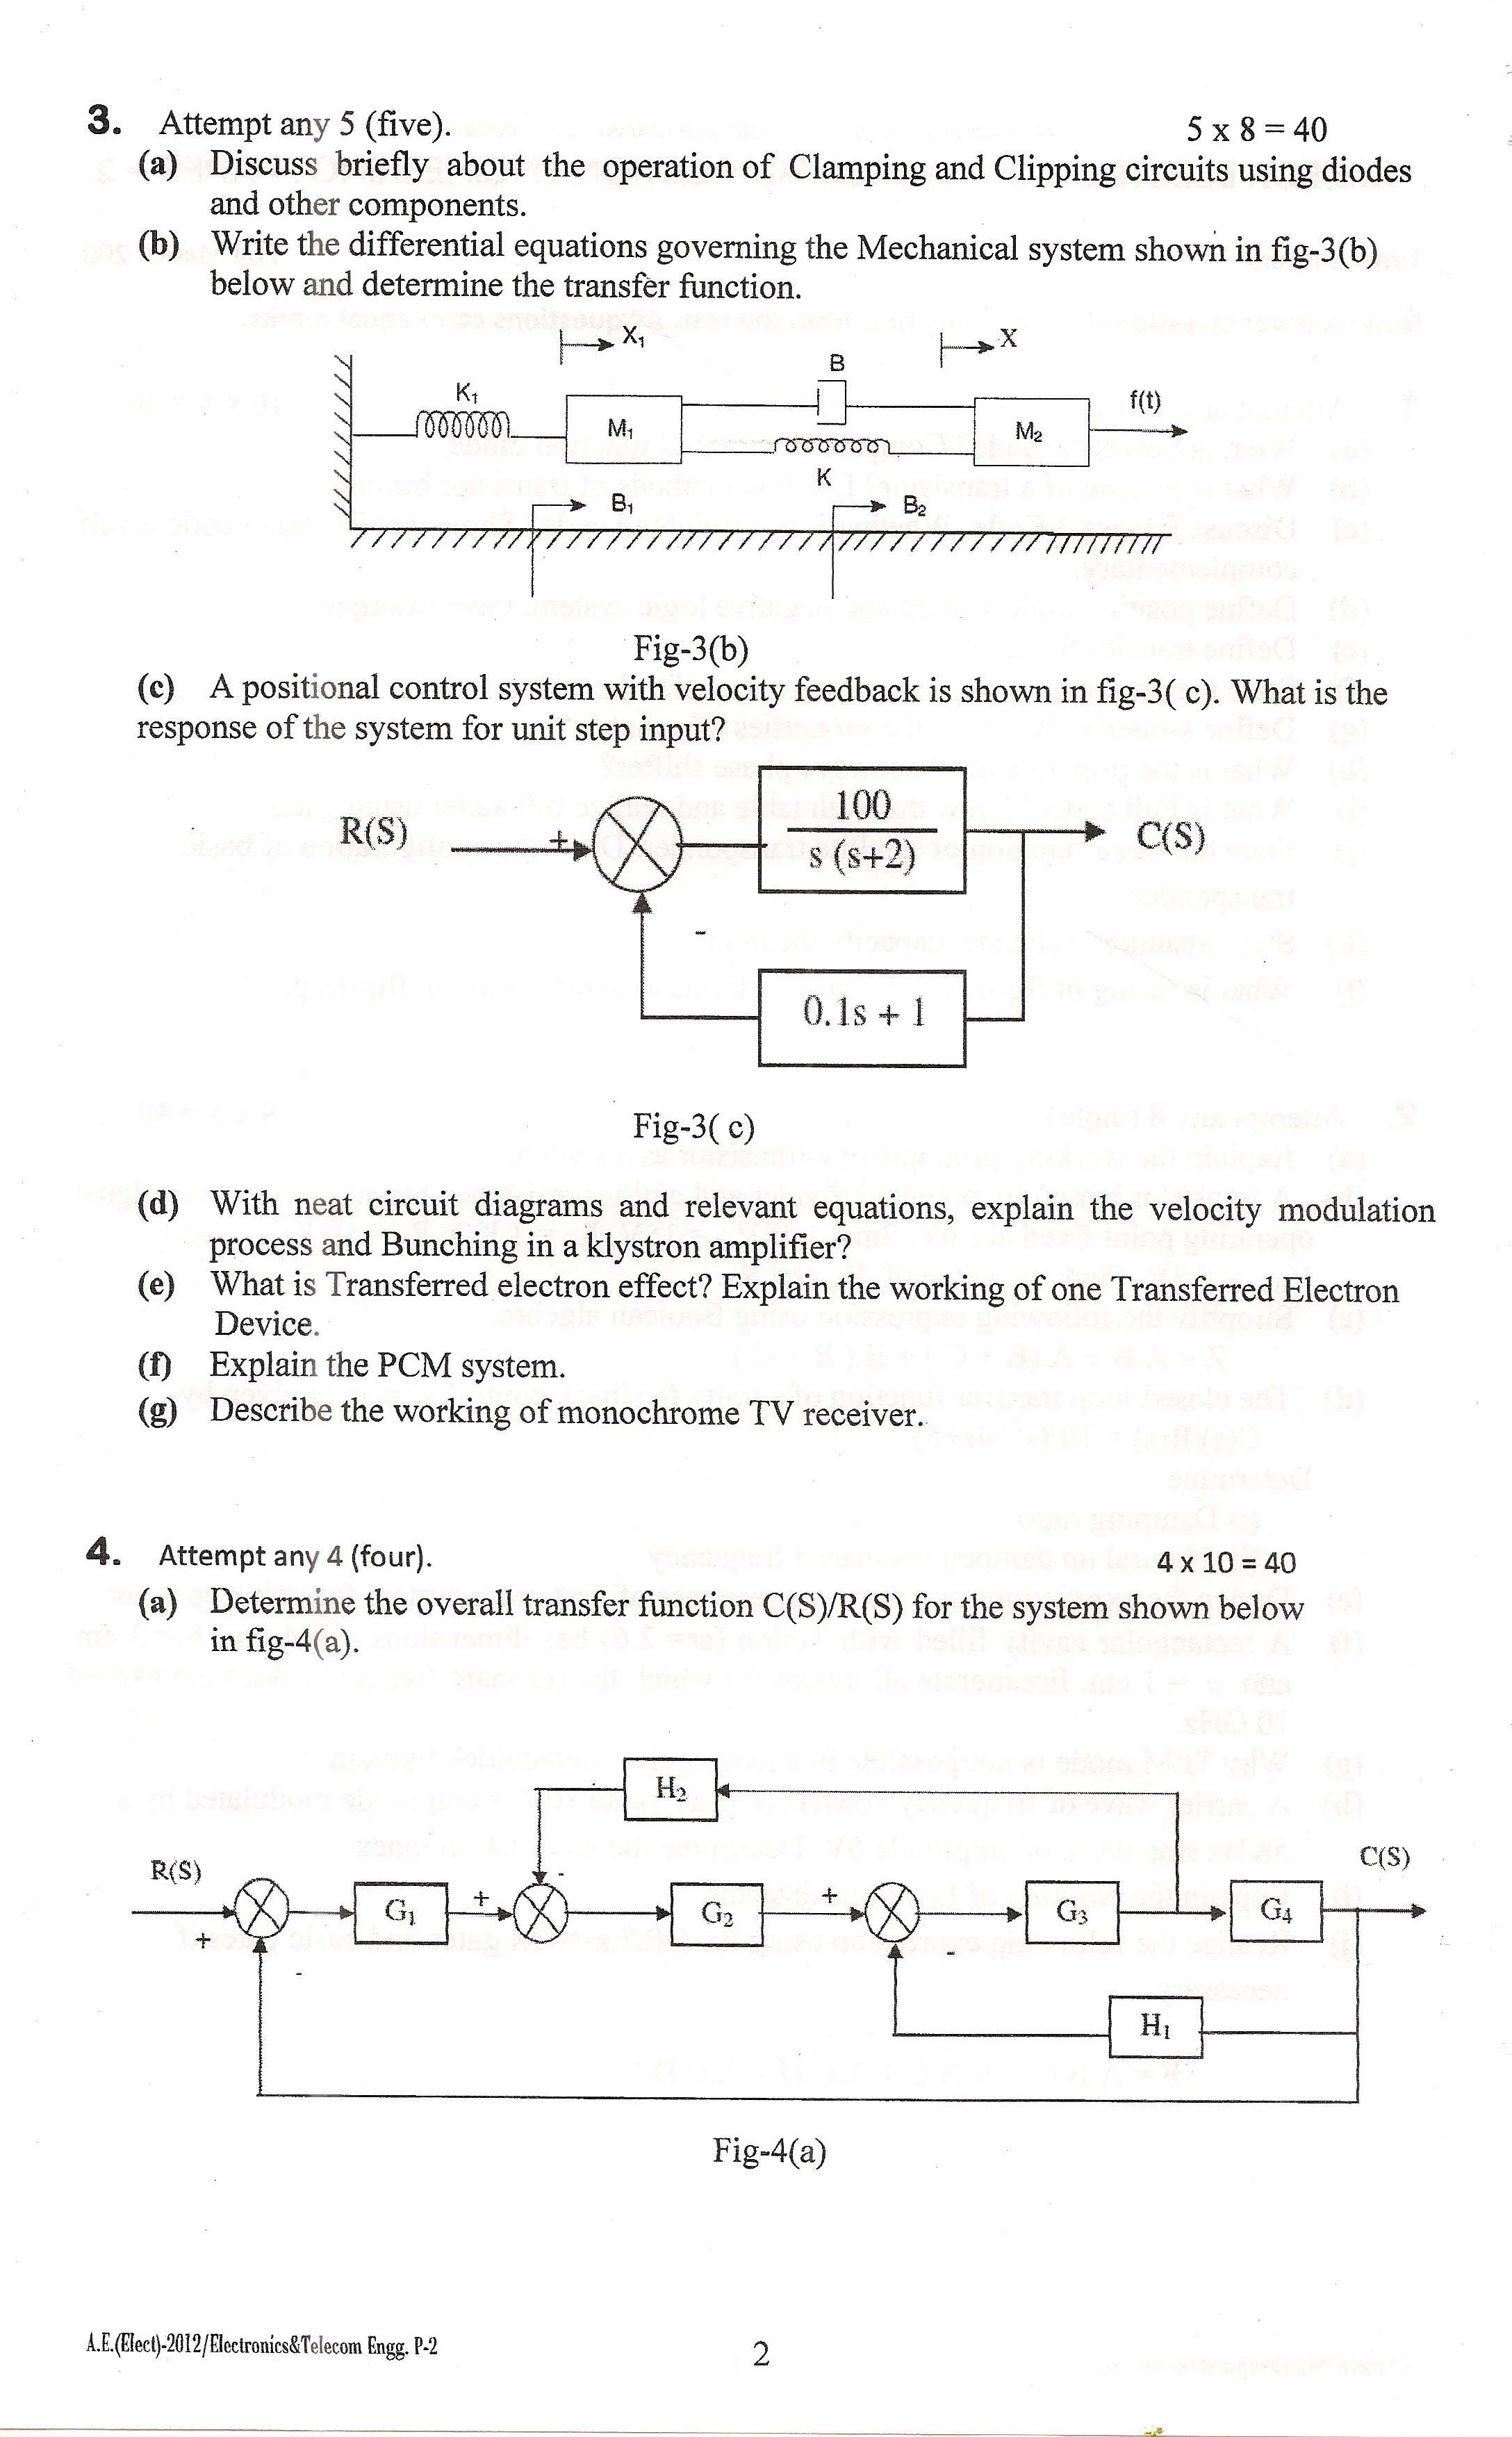 APPSC AE Electrical Exam 2012 Electronics and Telecommunication Paper II 2